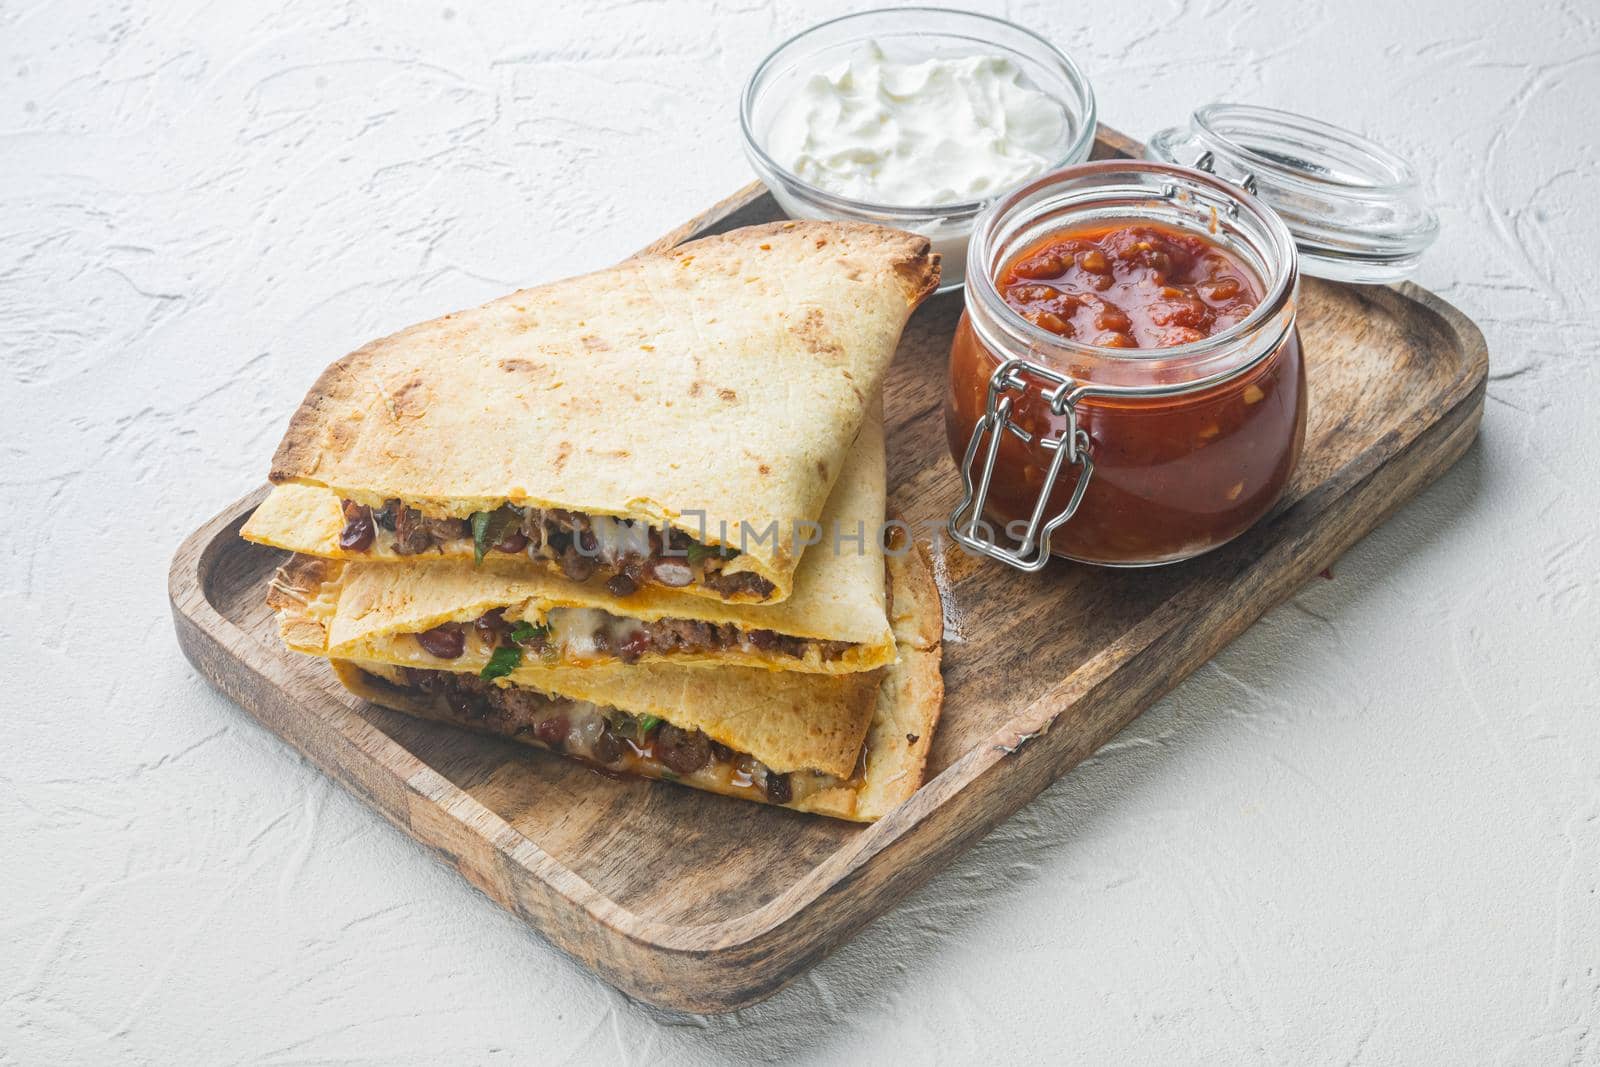 Quesadilla with chicken, cheese and peppers, on white background by Ilianesolenyi